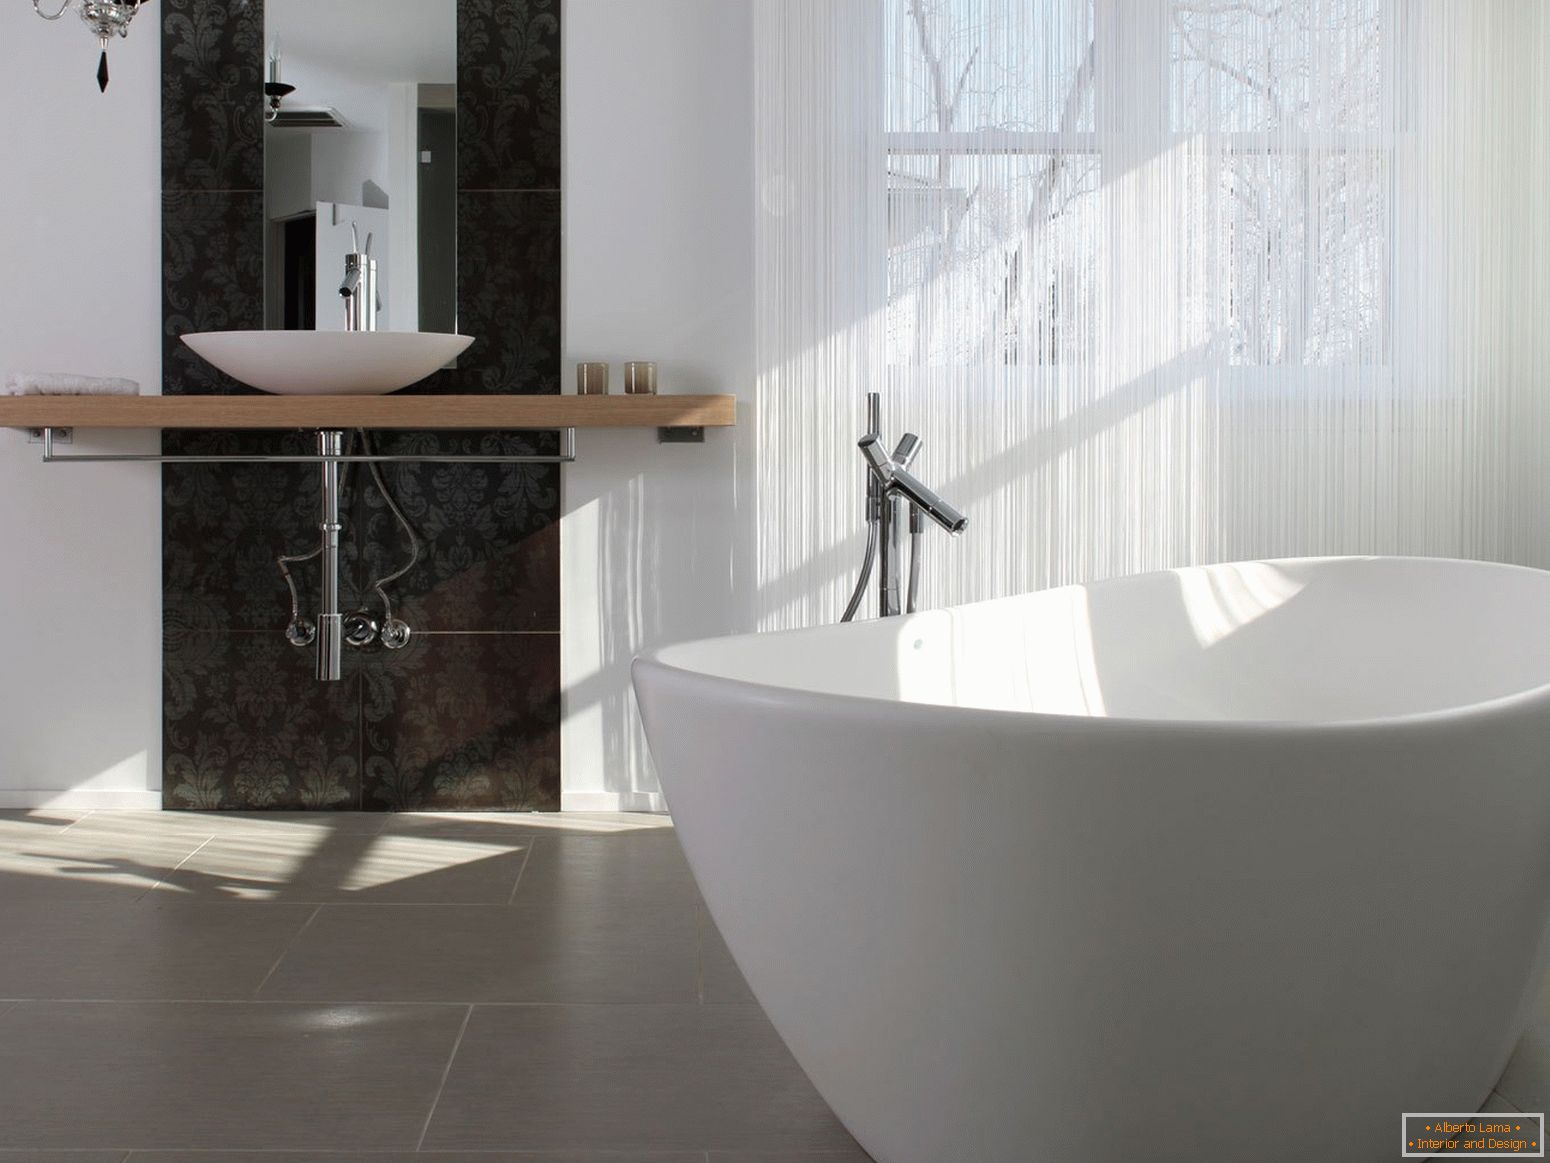 Luxury and simplicity in the design of the bathroom